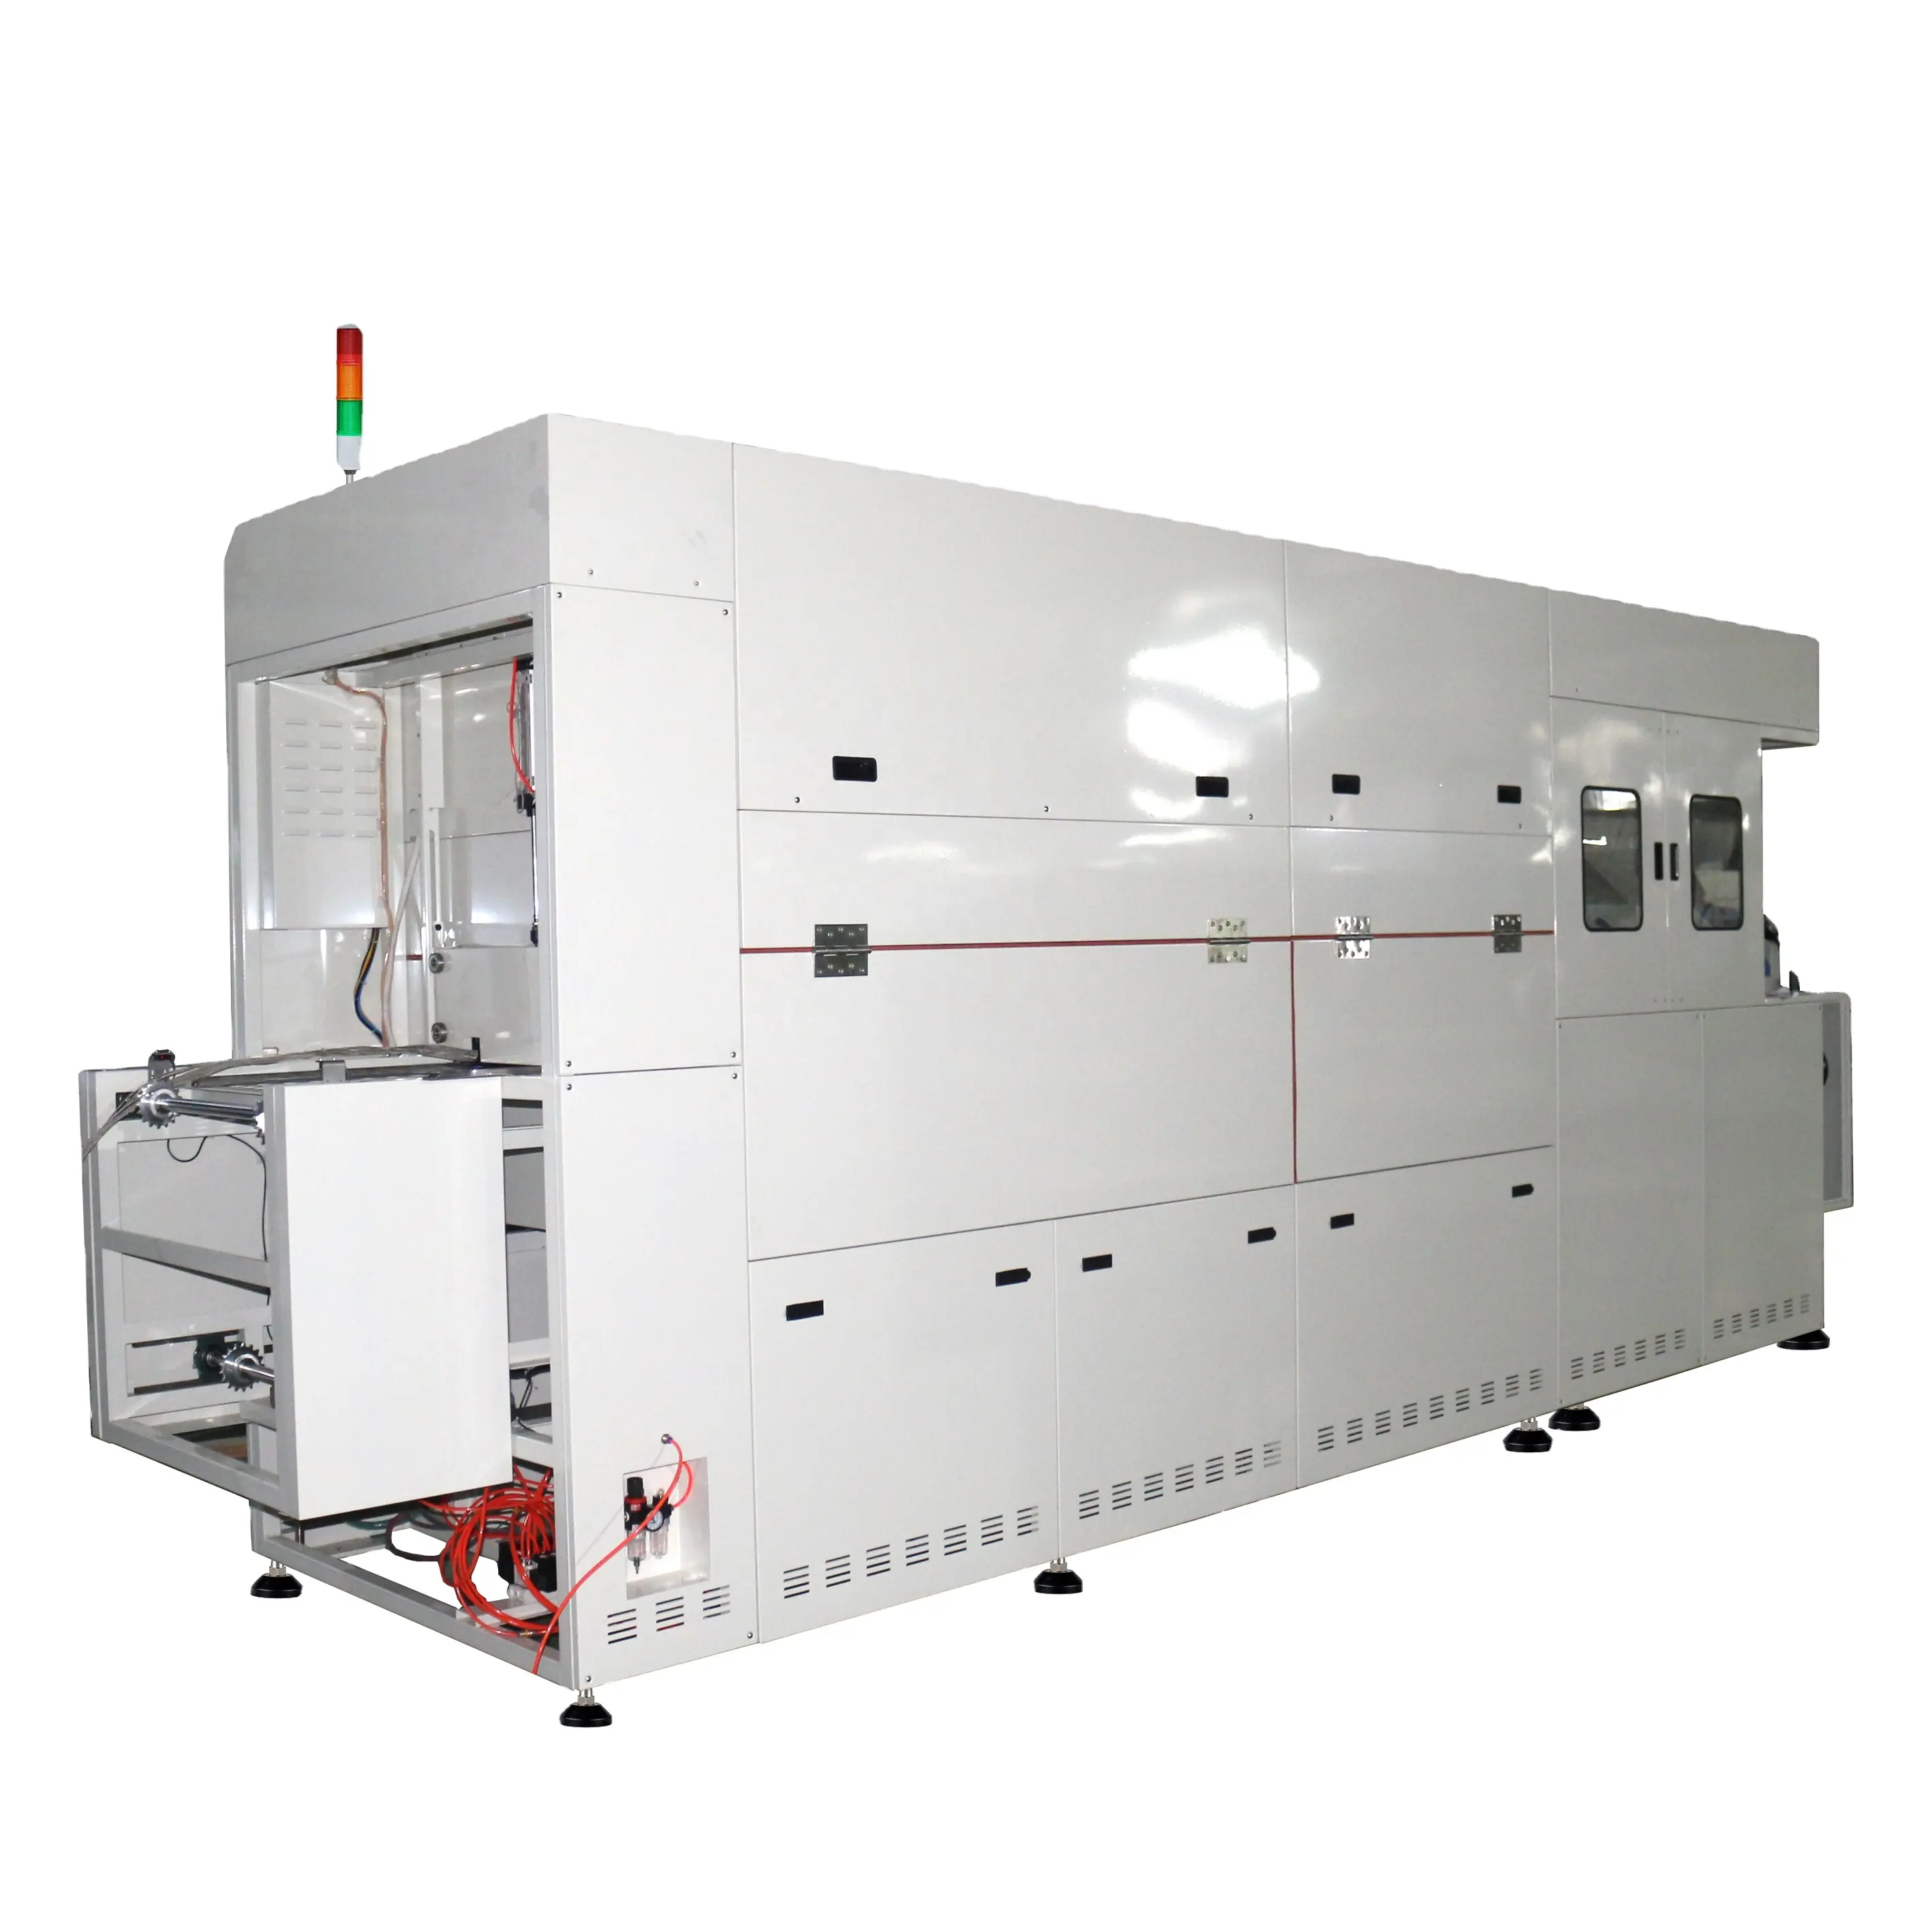 conveying tunnel hot air drying machine oven for plastic polymer semiconductor electronics textile fabrics metal bottle glass